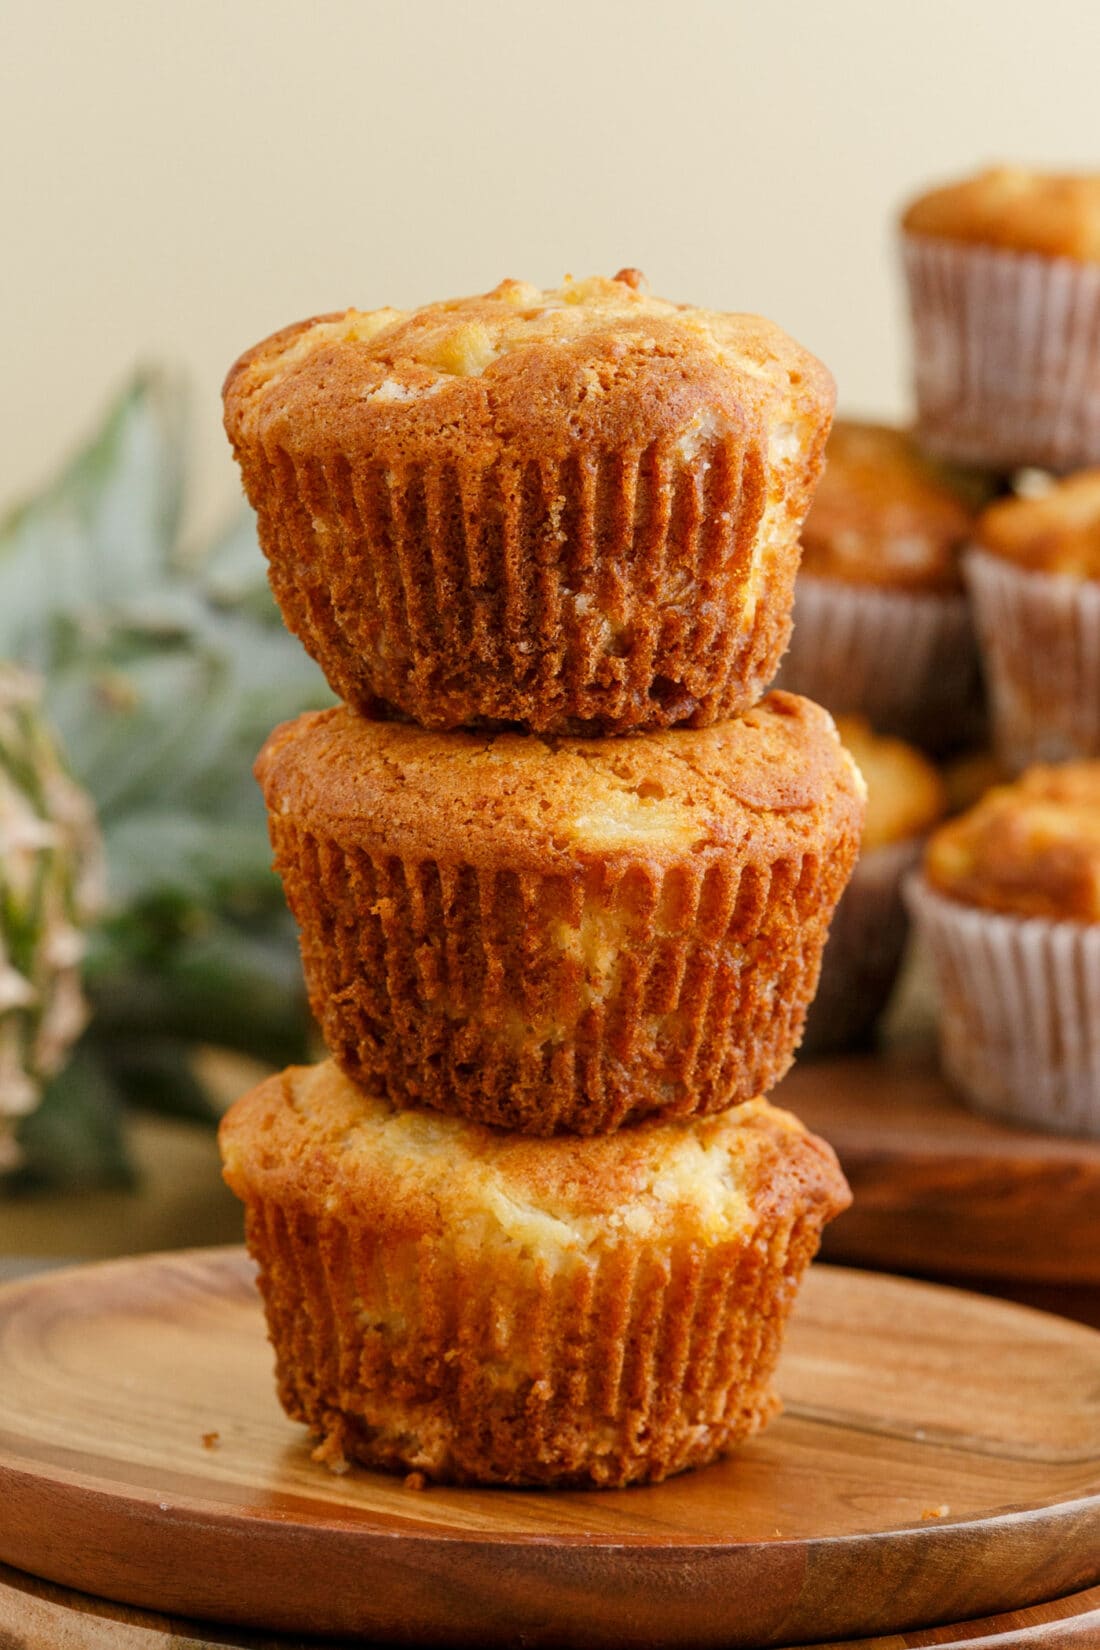 Stack of three Pineapple Muffins on a wooden plate